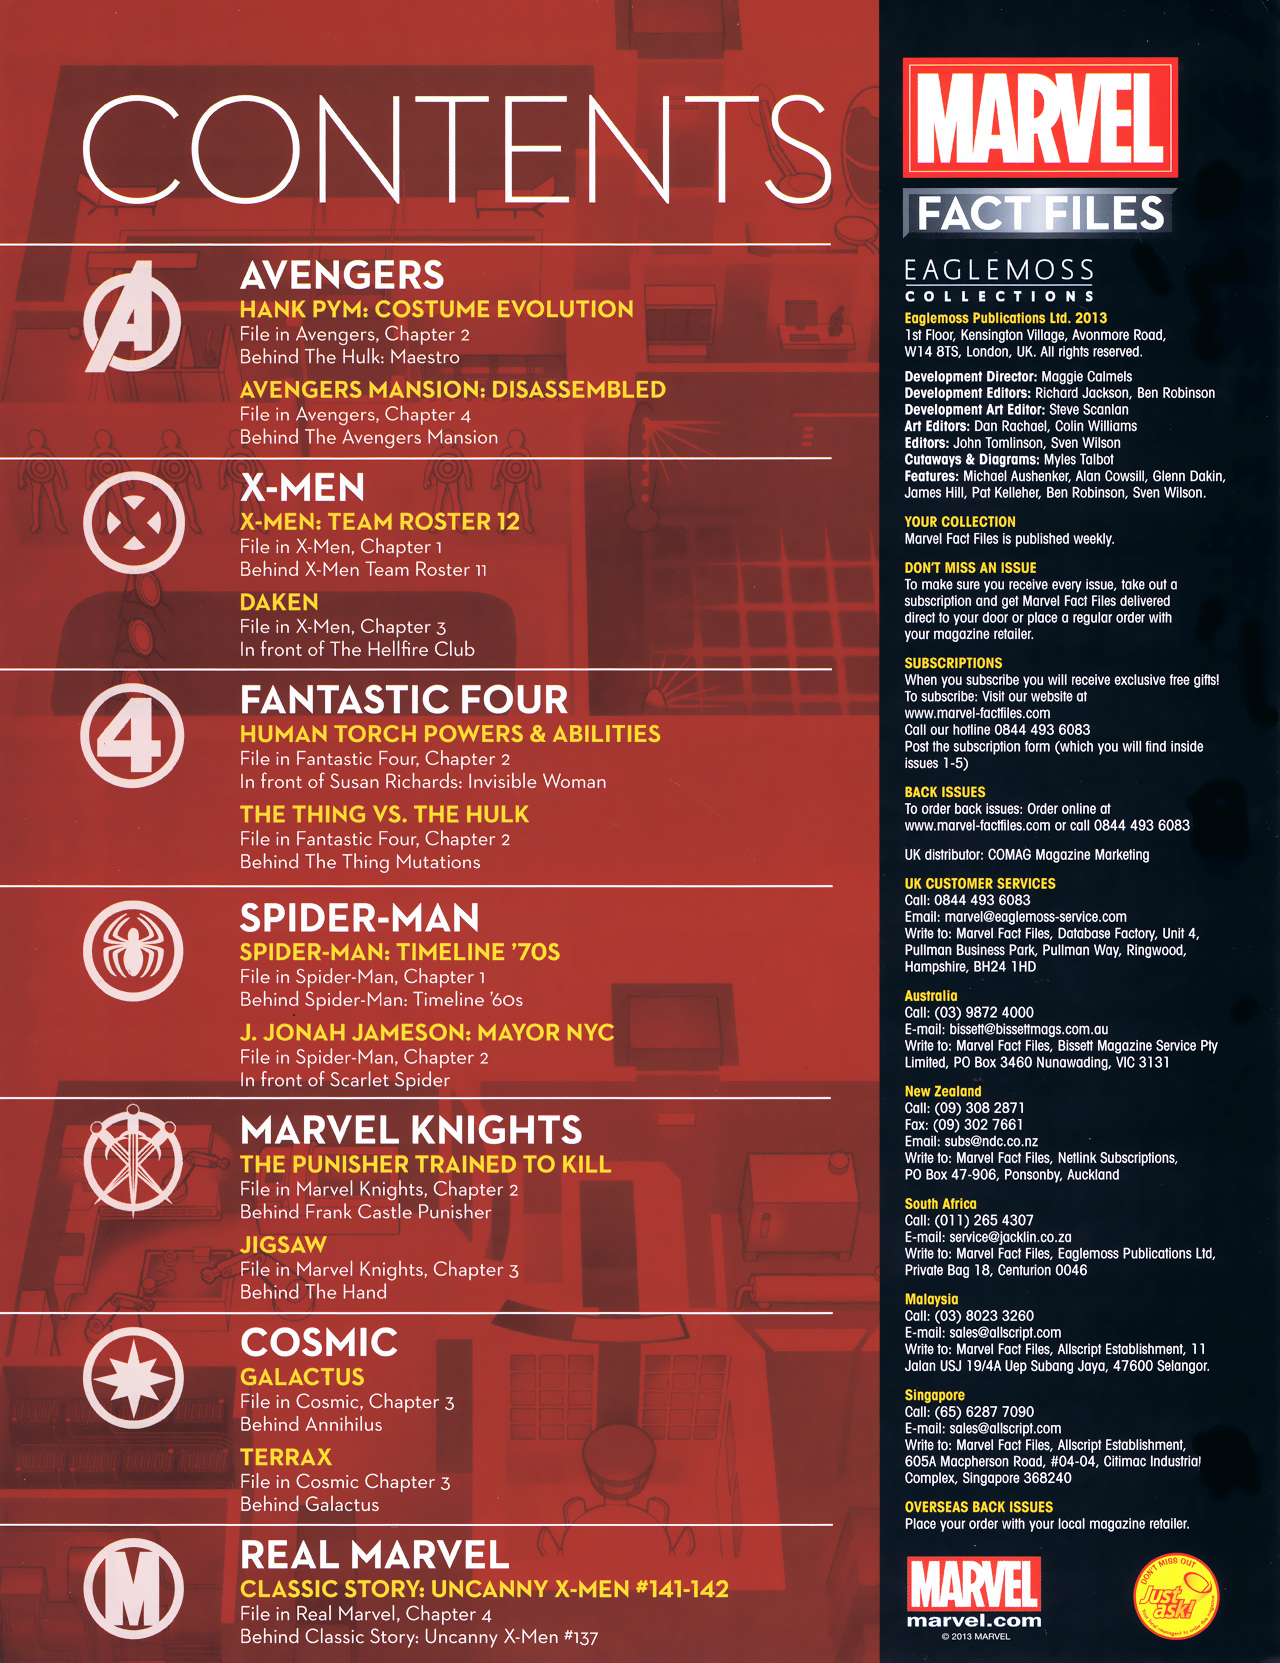 Read online Marvel Fact Files comic -  Issue #12 - 2